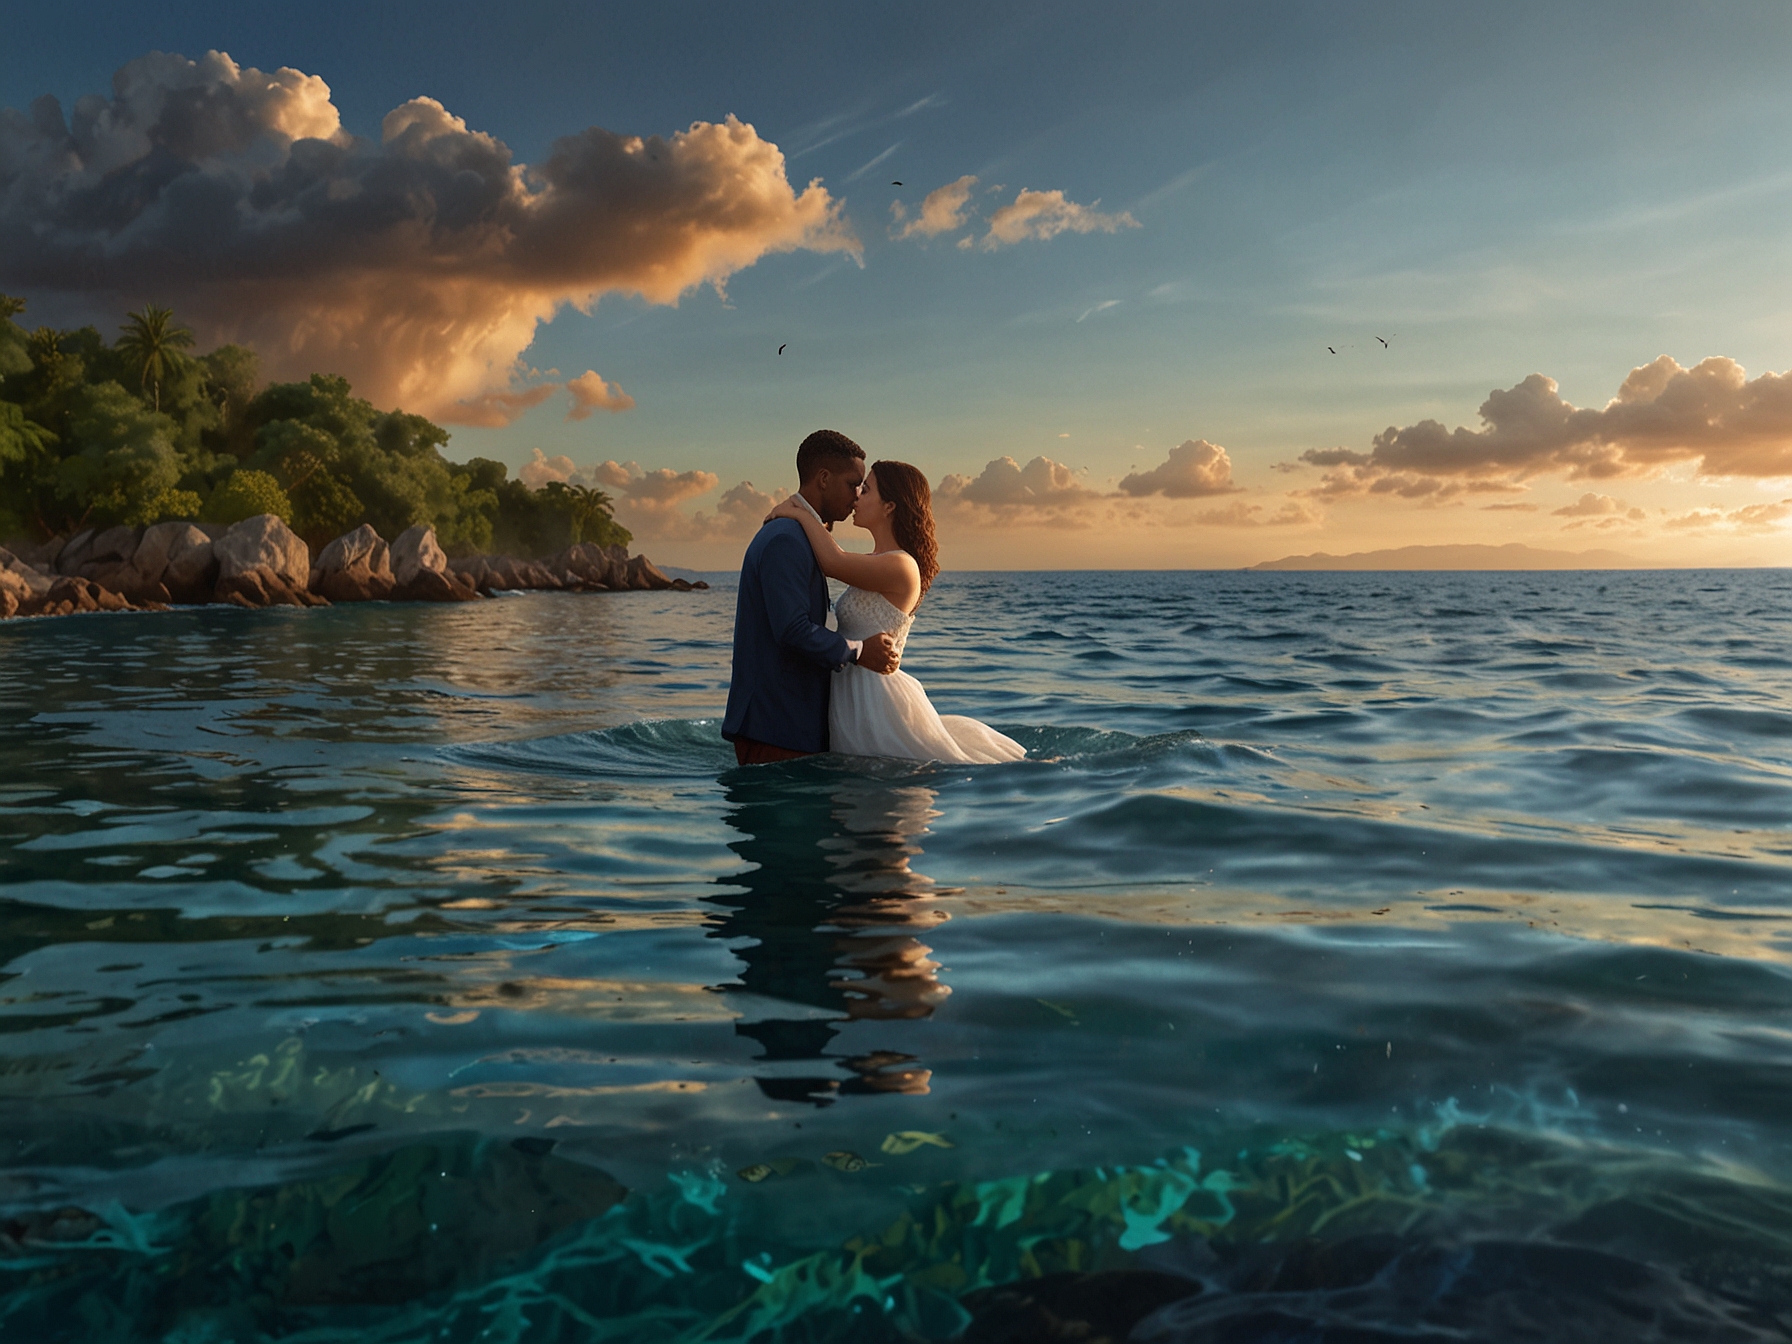 Britt Stewart and Daniel Durant enjoy a romantic moment by the crystal-clear waters of Jamaica, capturing the essence of their engagement celebration surrounded by breathtaking natural beauty.